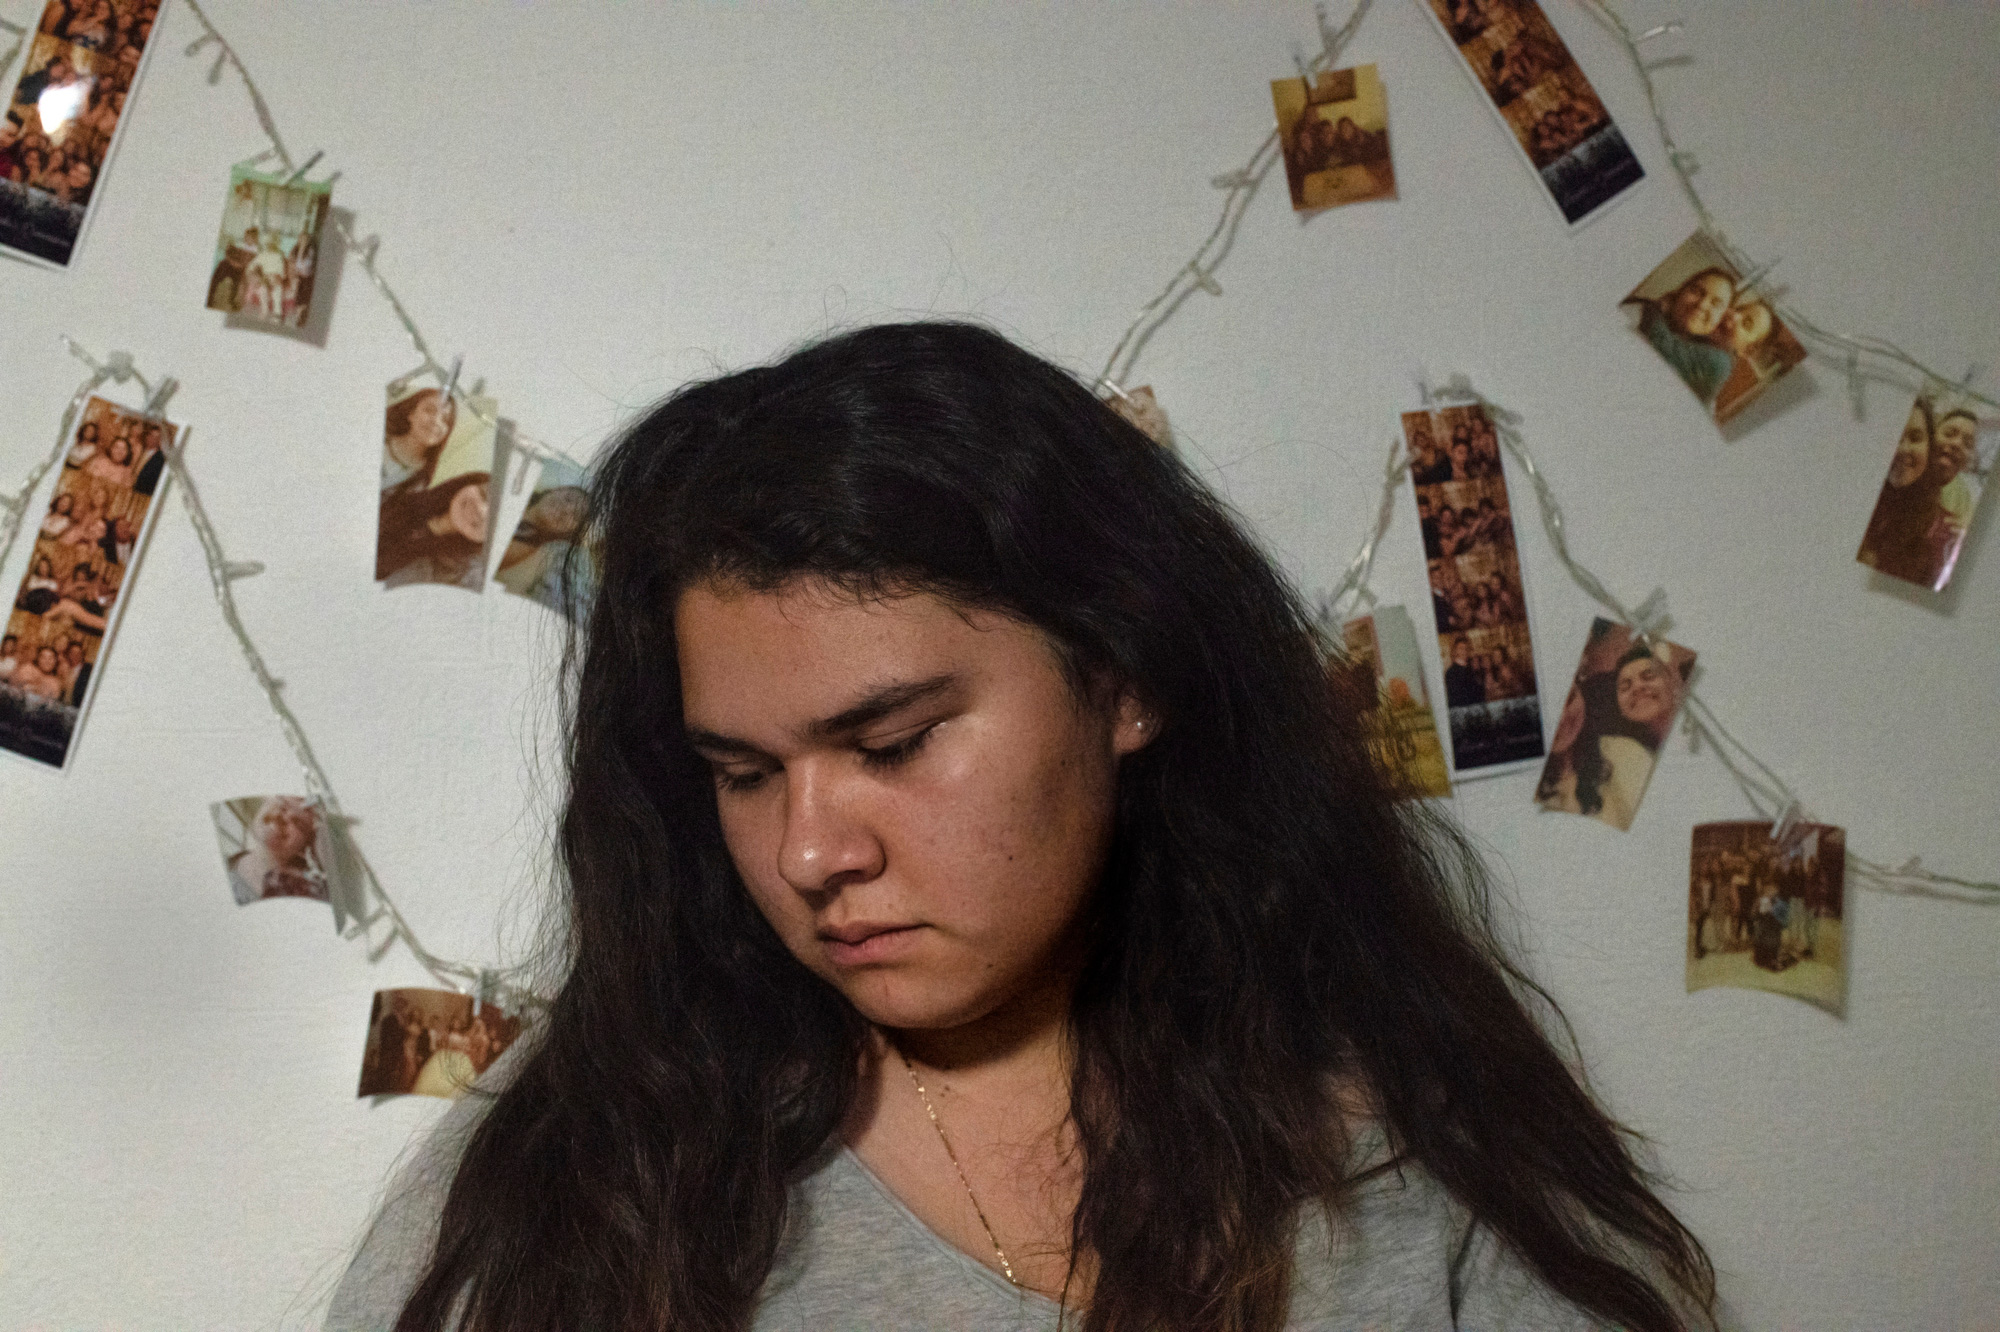 This photograph shows a teenage girl (Lulys) with long, dark hair and downcast eyes. She stands in front of a white wall with printed photographs clipped to strings. The pictures show other teenagers smiling.